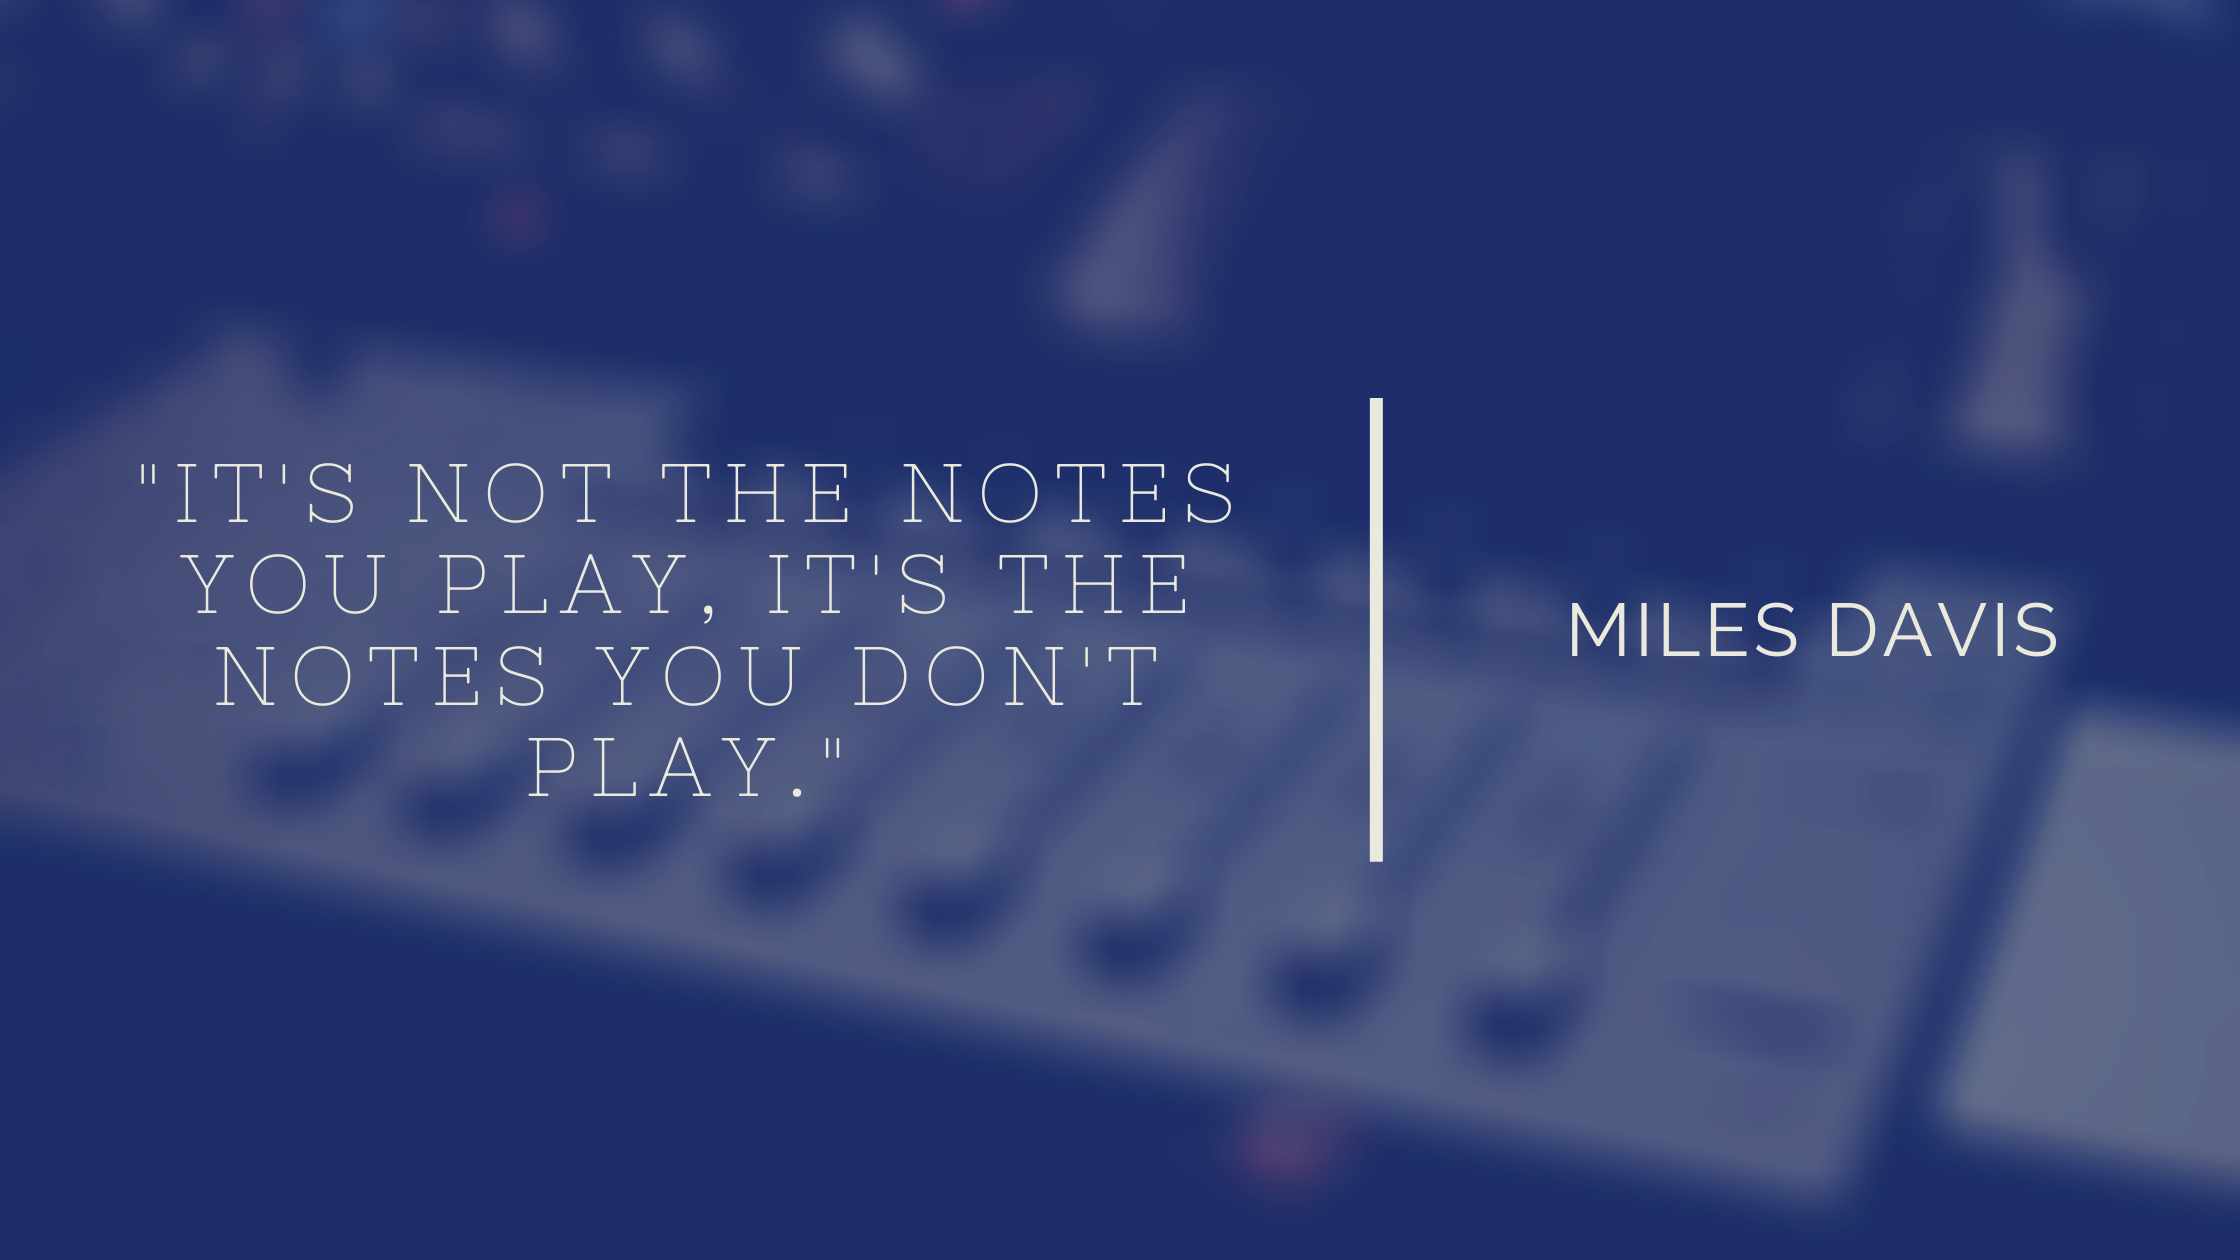 It’s not the notes you play, it’s the notes you don’t play. - Miles Davis